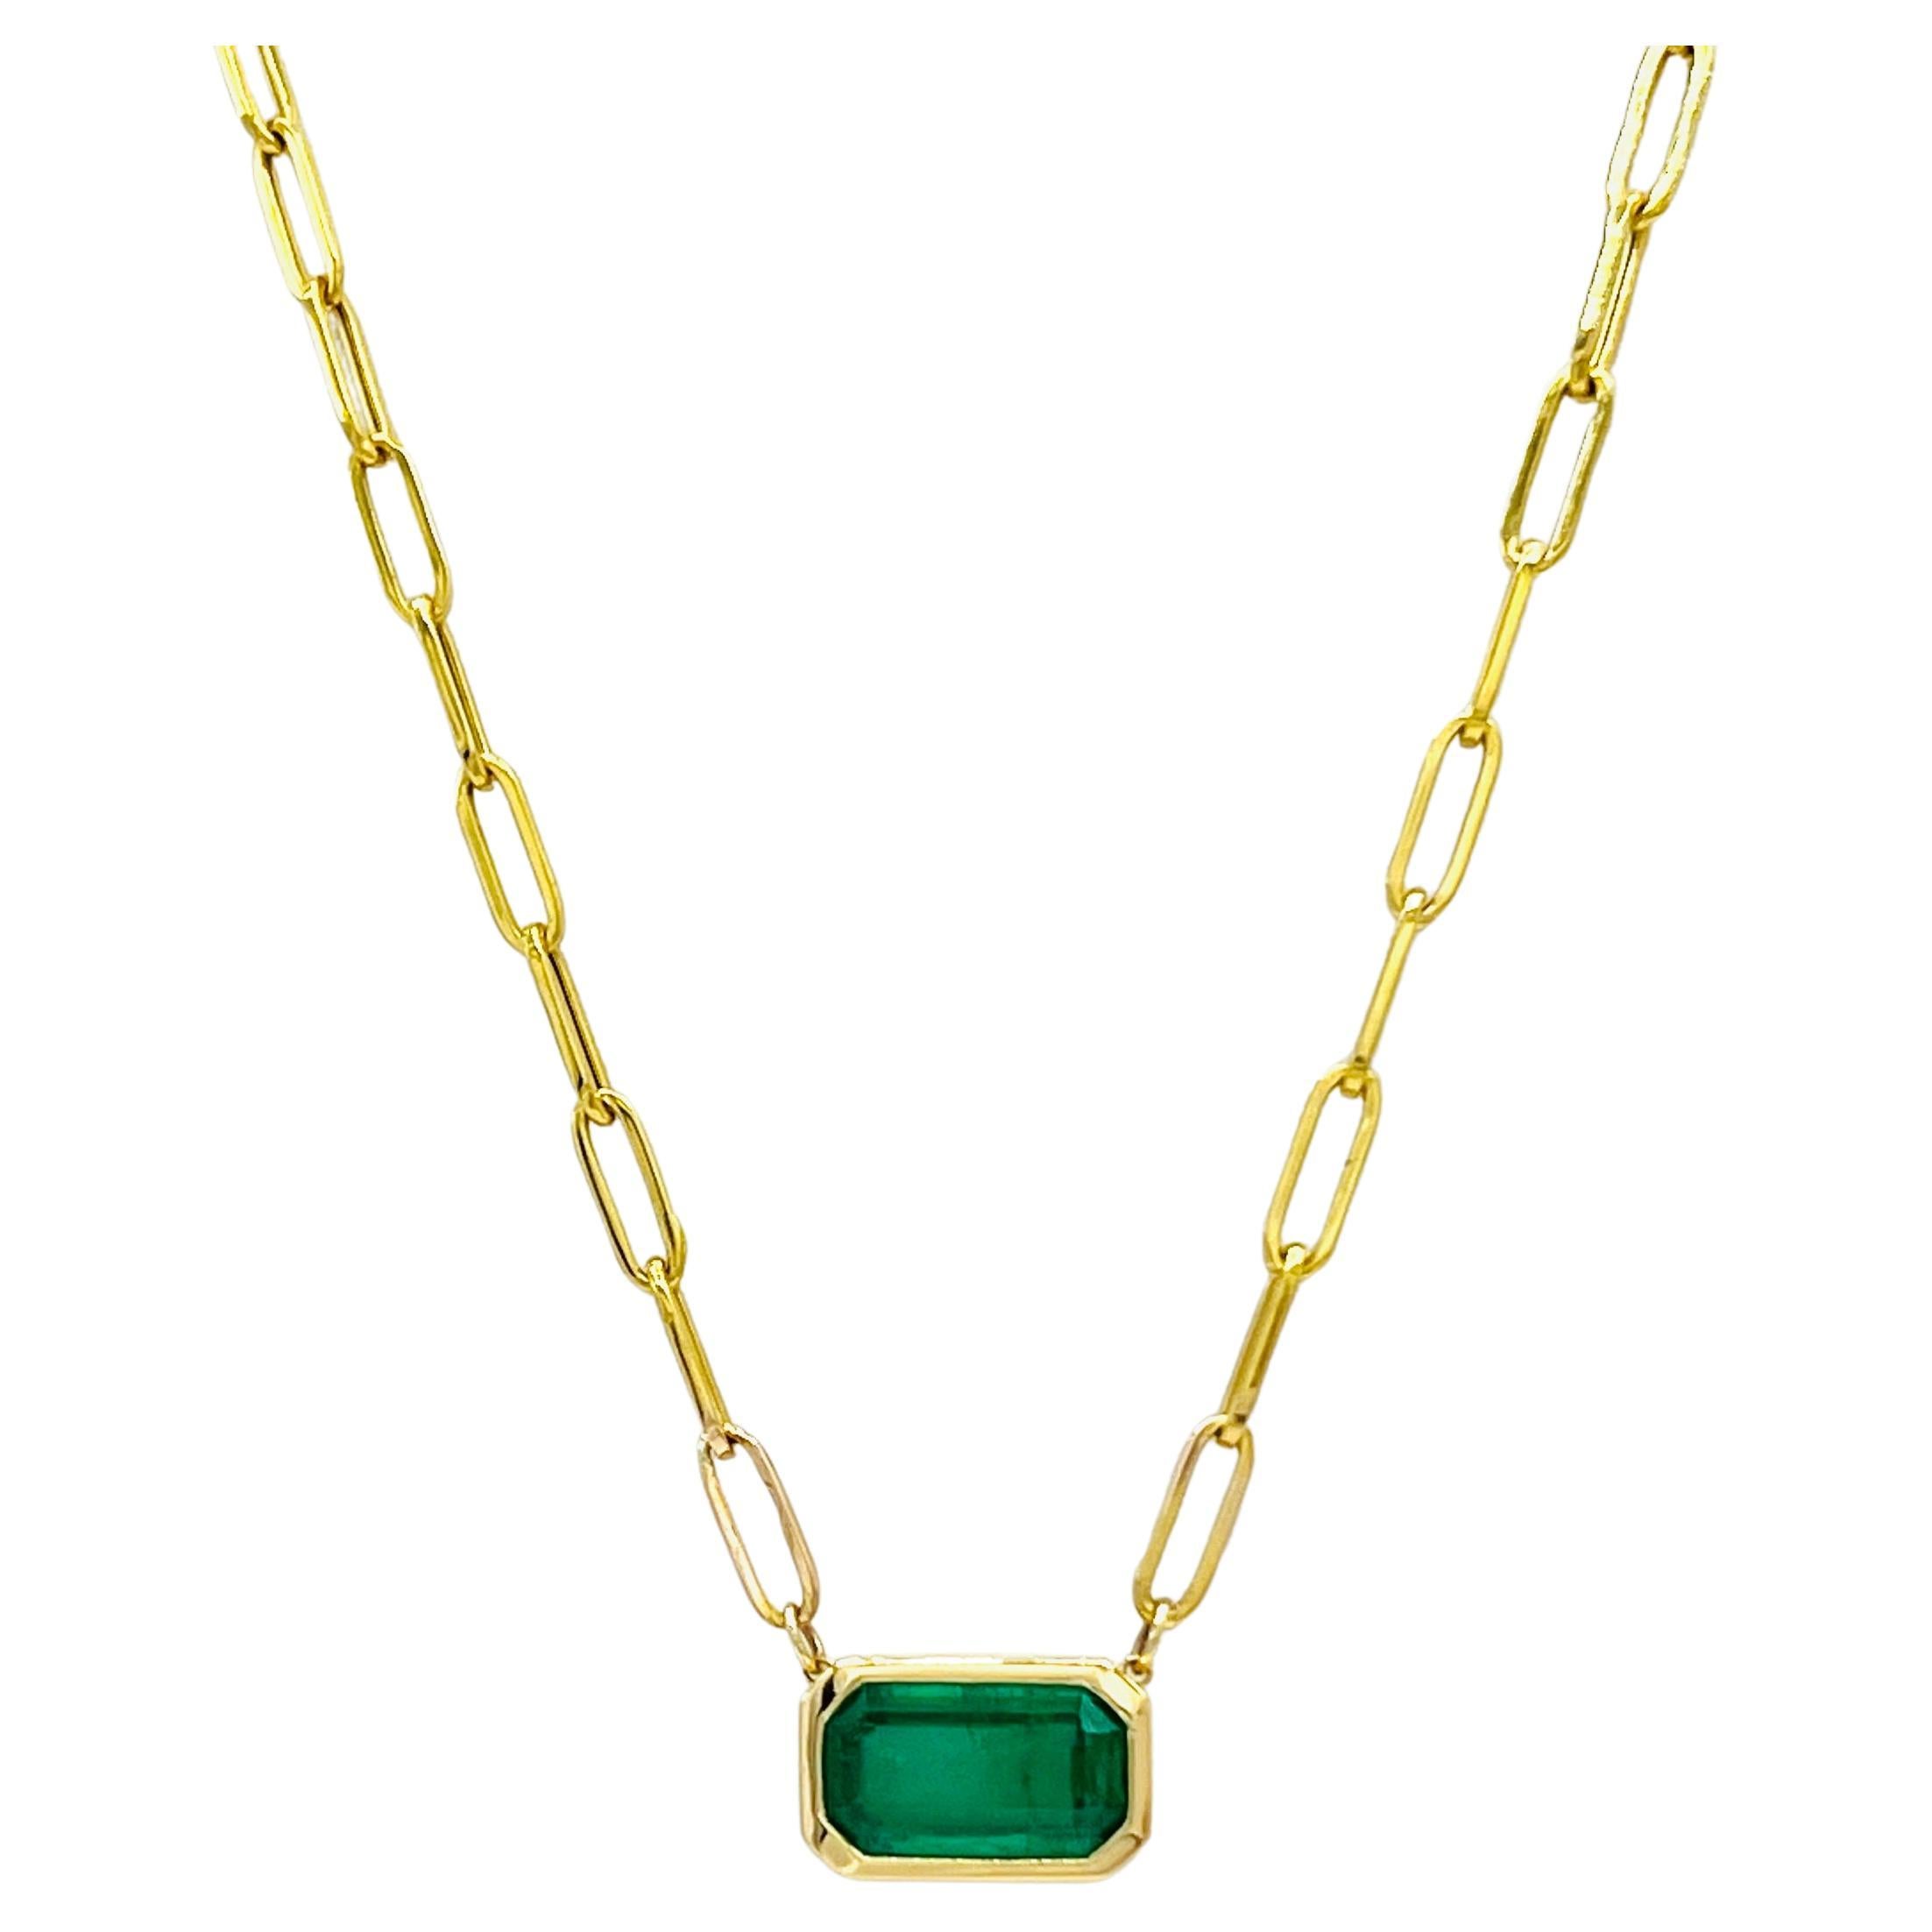 Emerald Bezel Paperclip Chain Necklace in 14K Yellow Gold